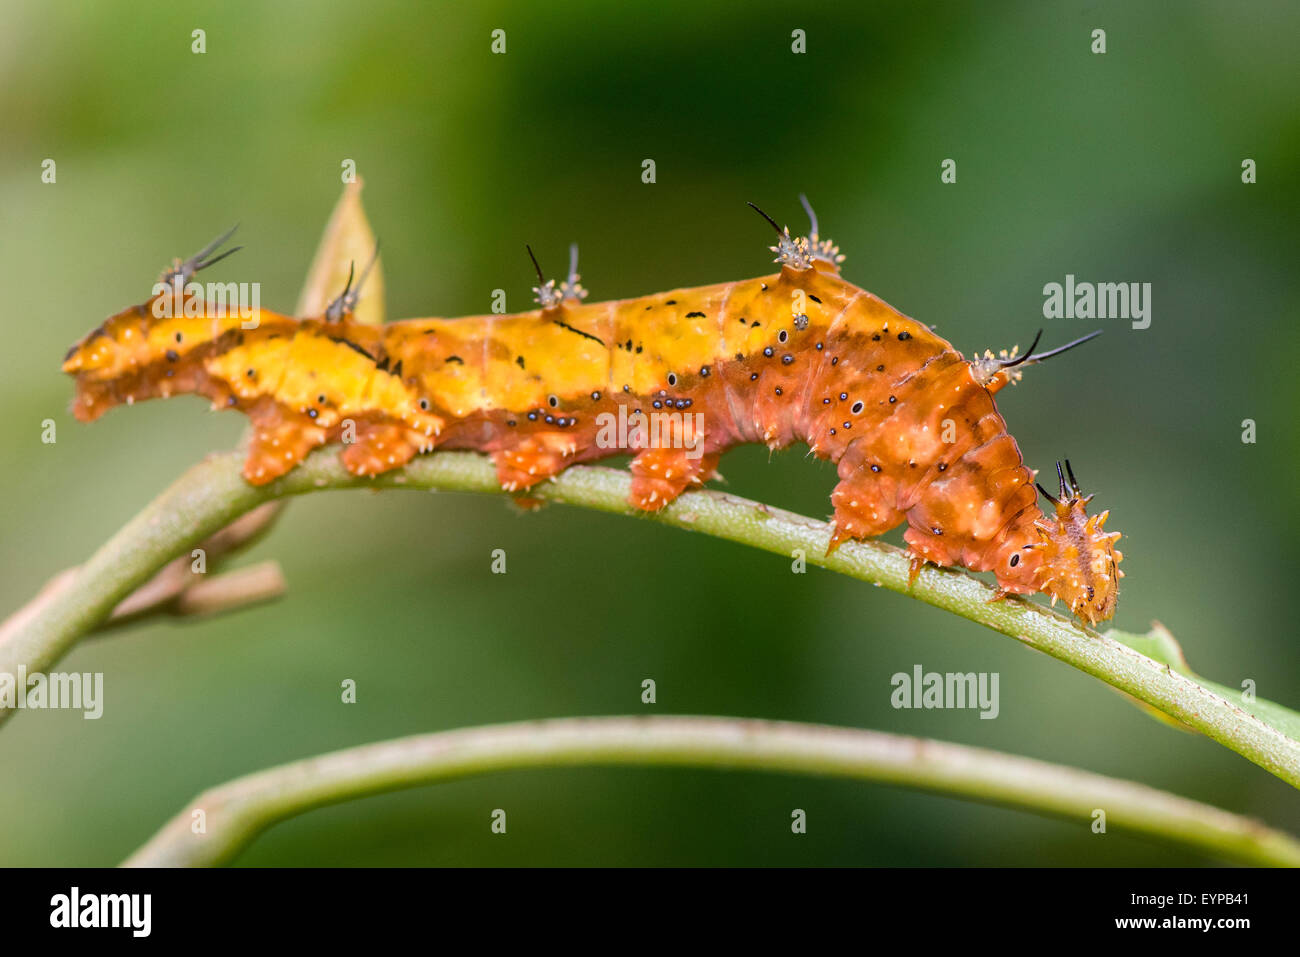 A larva of the Marbled Leafwing butterfly Stock Photo